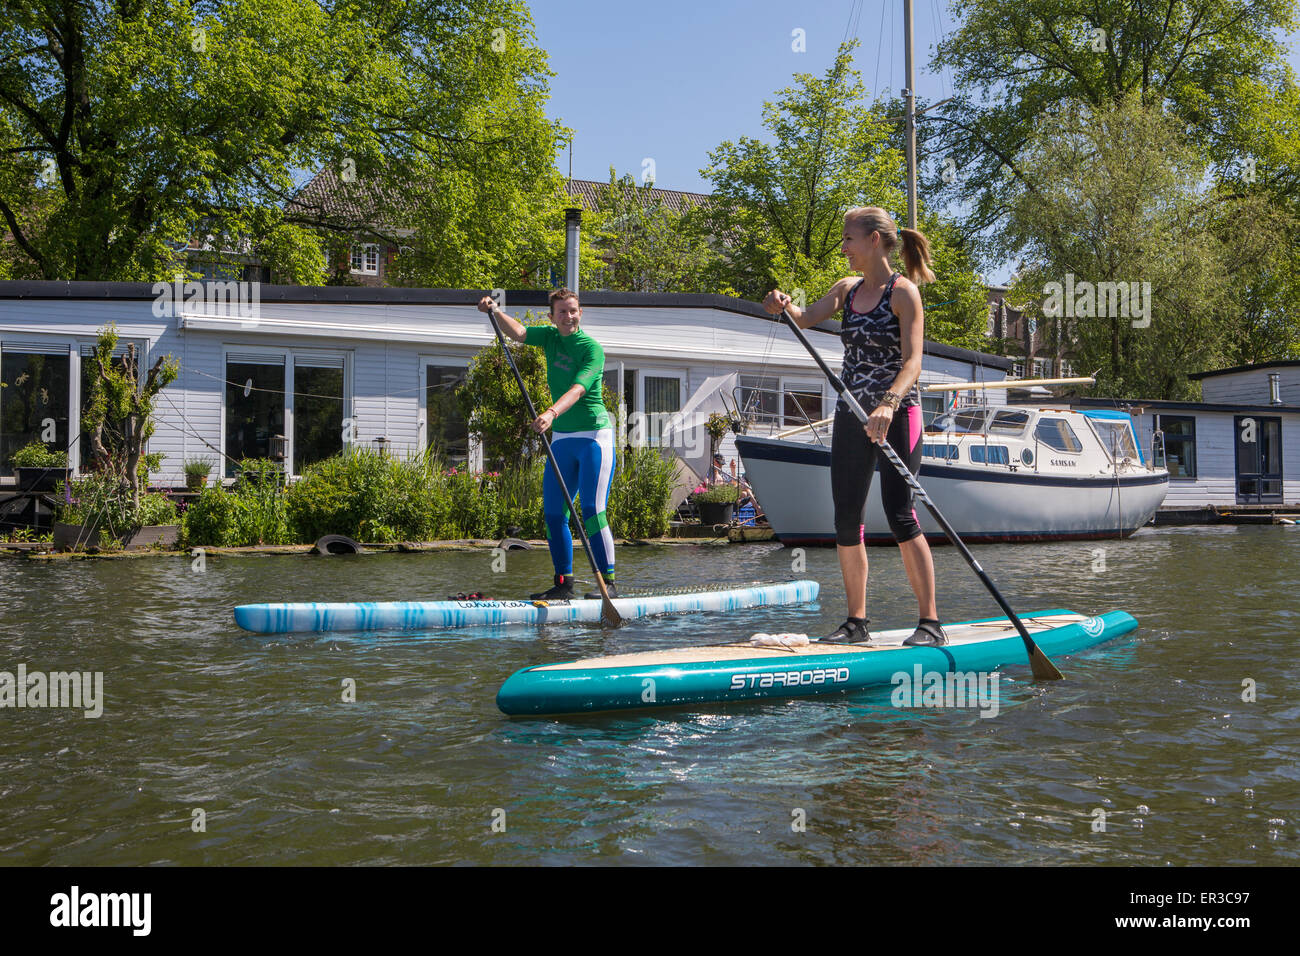 SUP (Stand Up Paddling) in the Amsterdam Canals Stock Photo